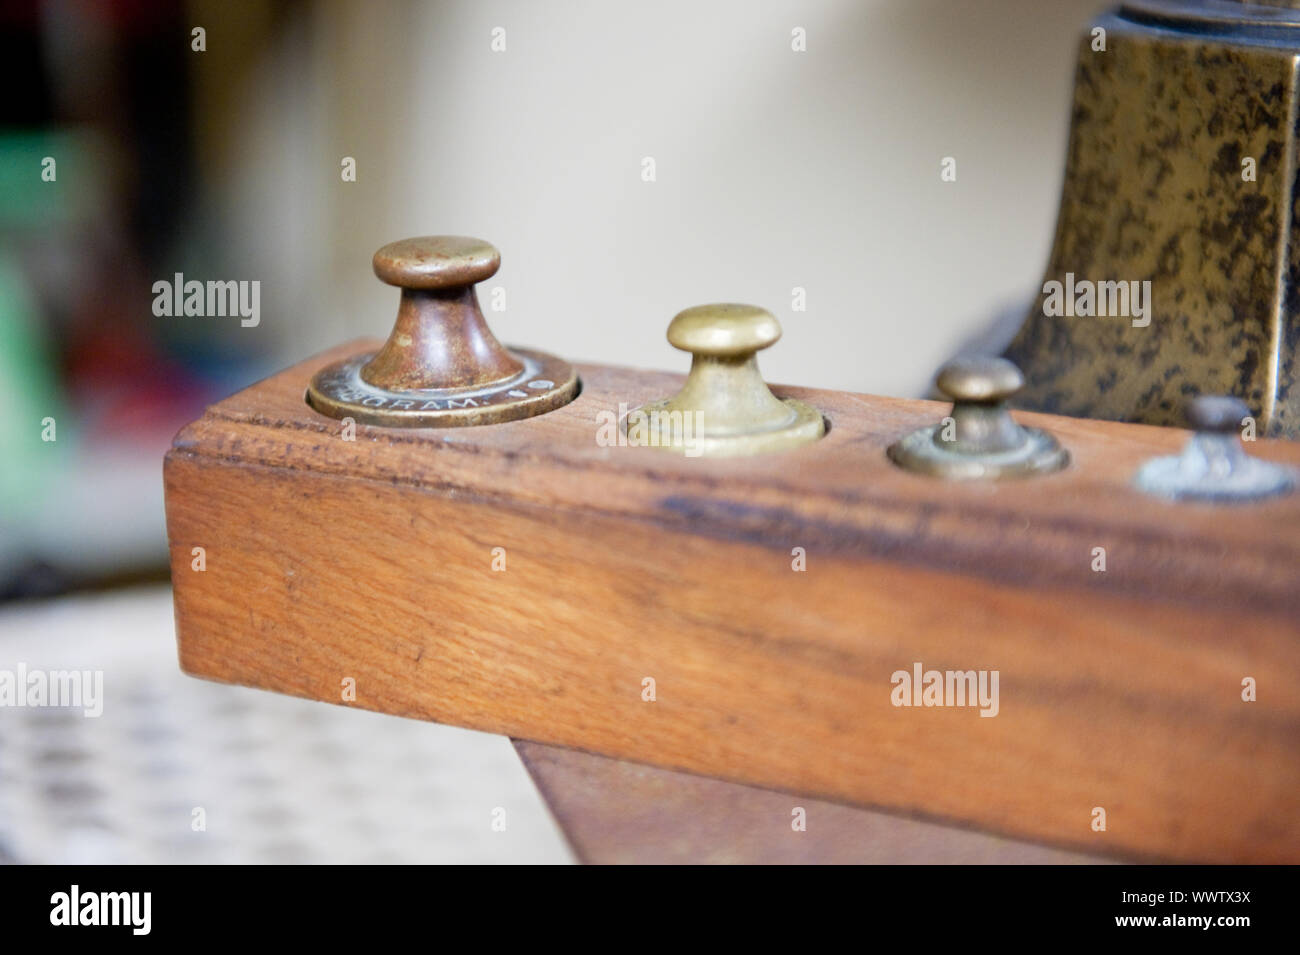 Old fashioned metal weights in wooden tray Stock Photo